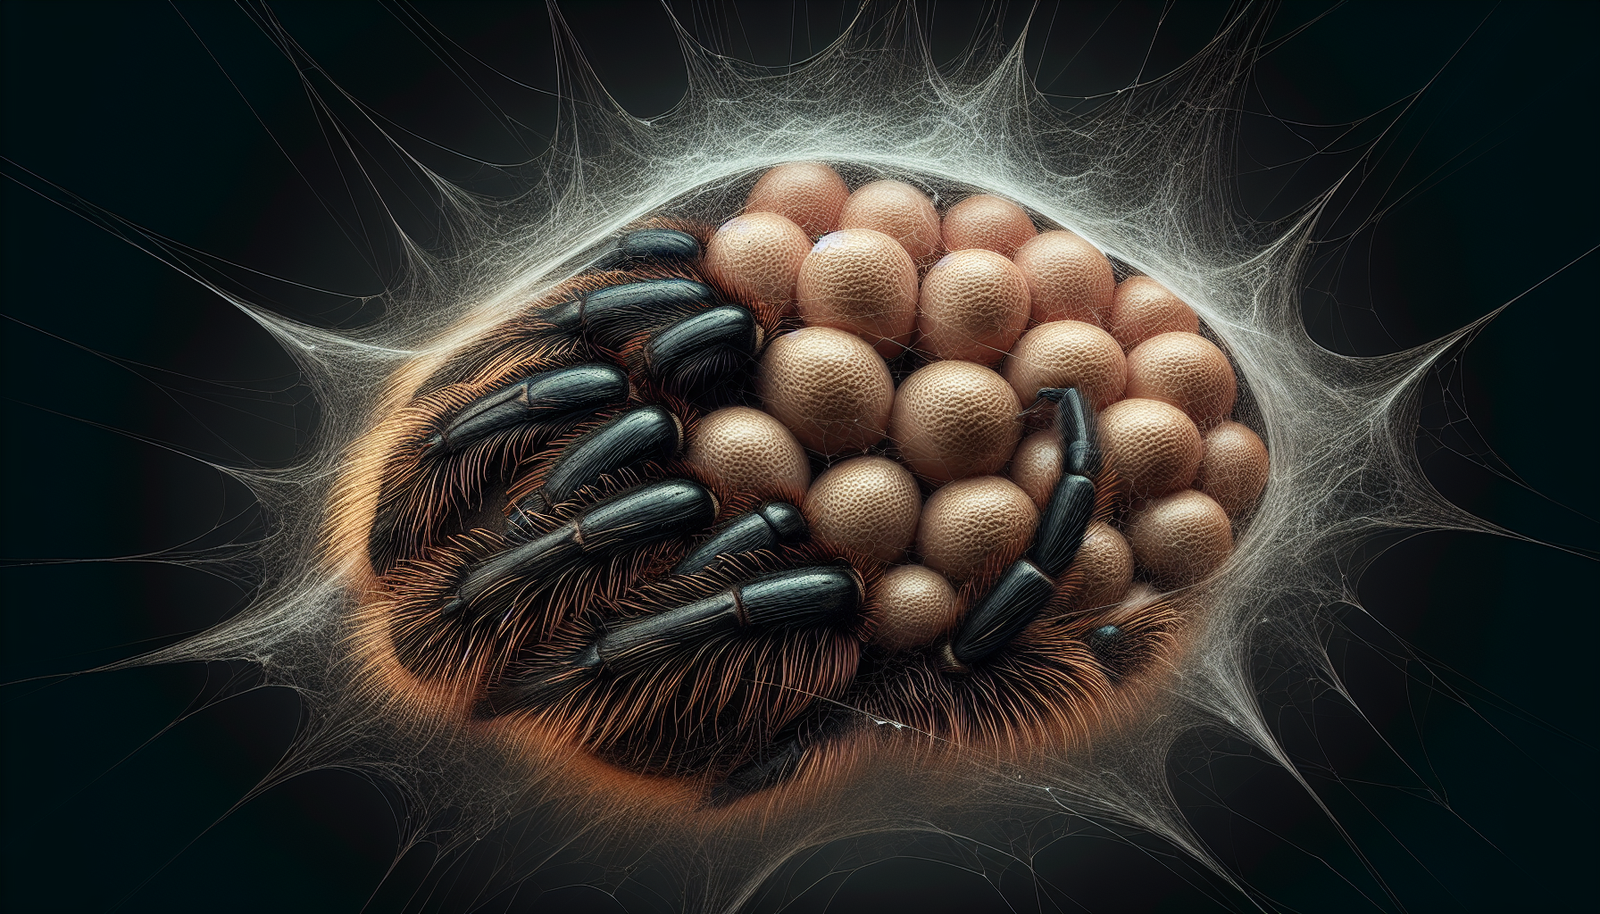 What Is The Expected Hatching Time For Tarantula Eggs?